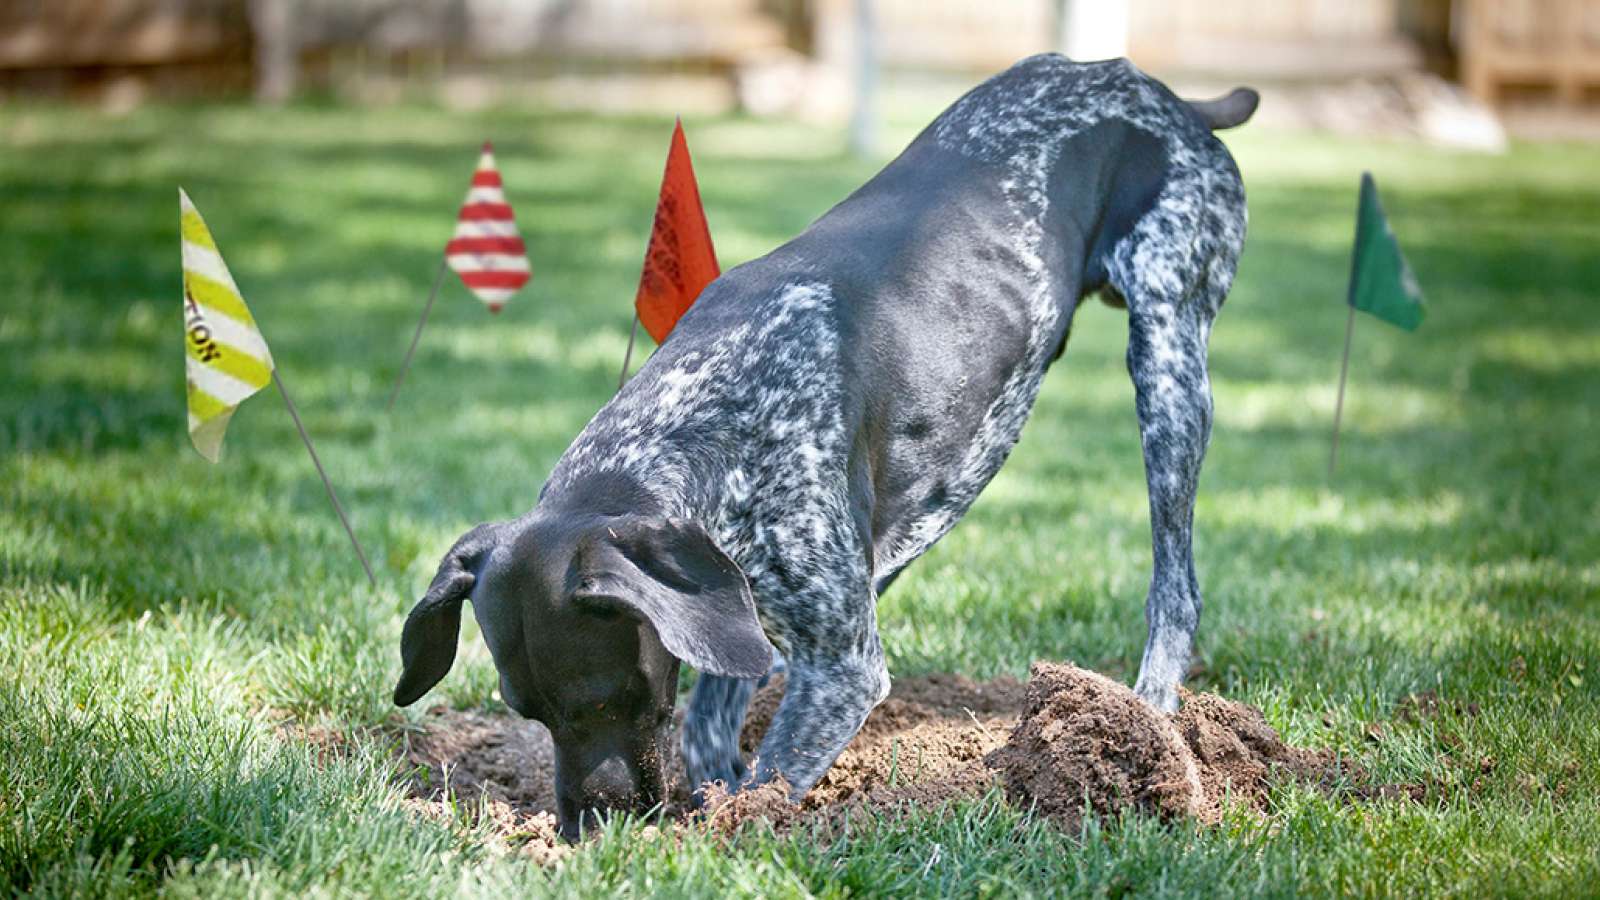 Dog digging in the yard with utility flags around.